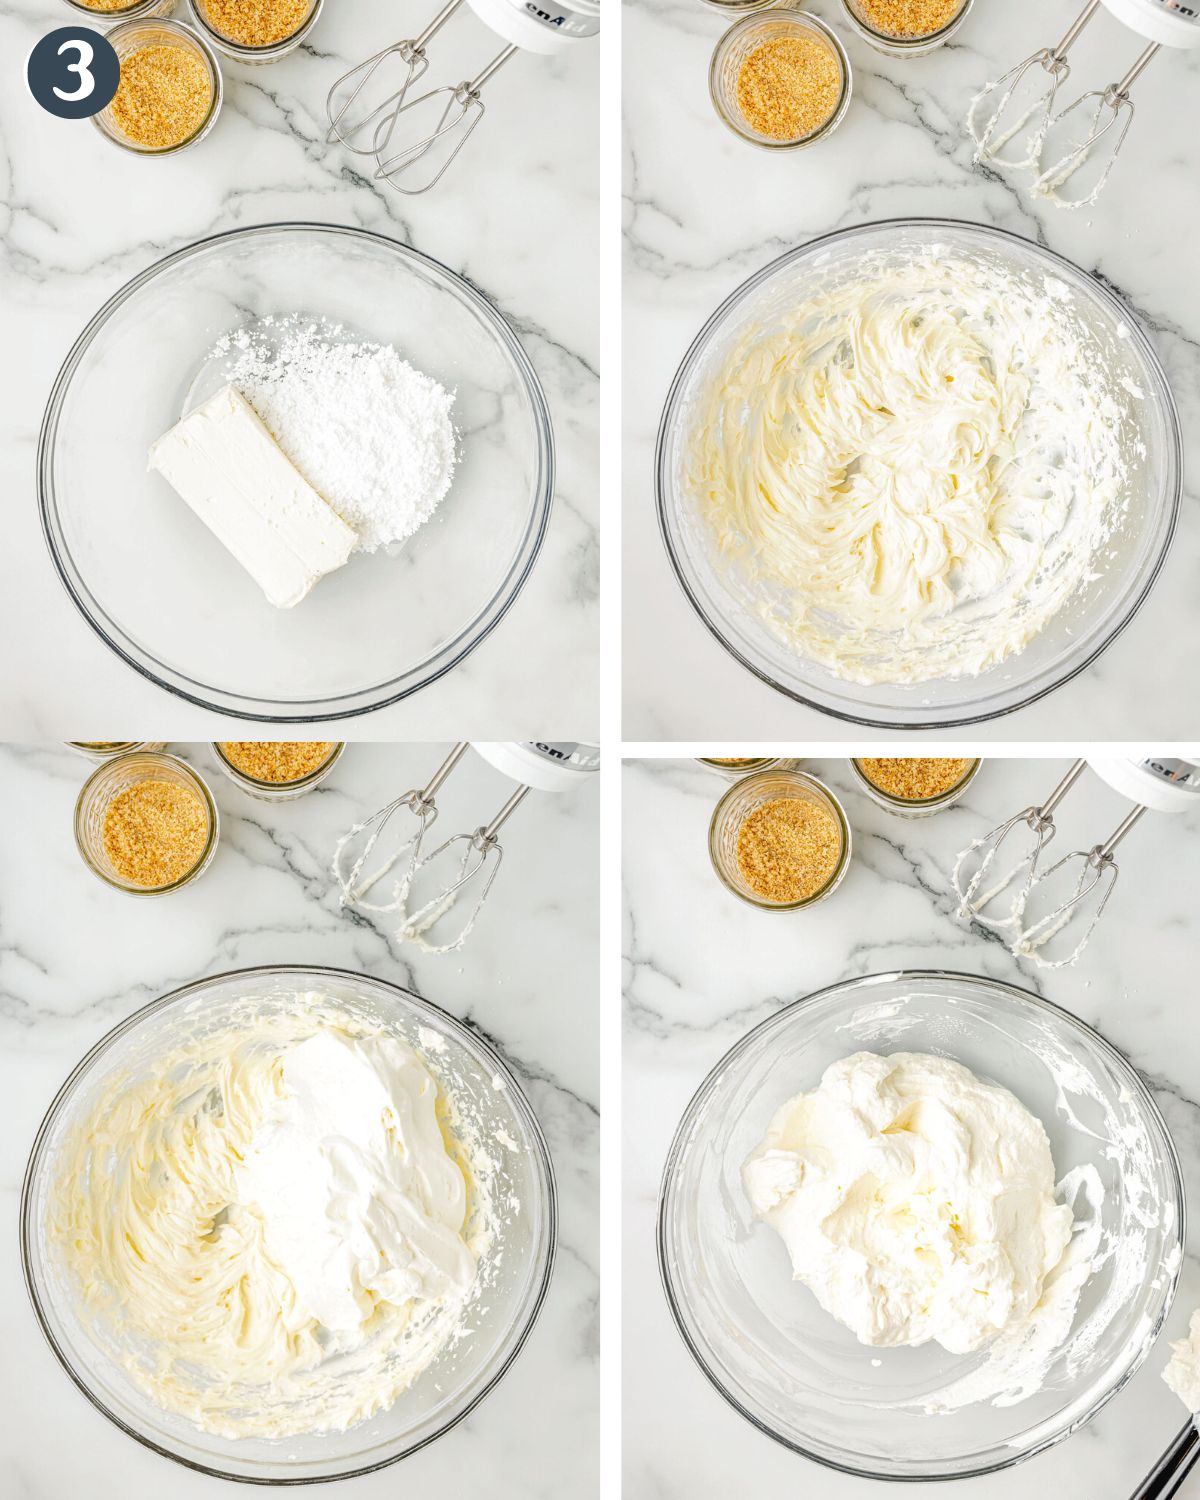 4 images showing steps to make cheesecake filling in a glass bowl.